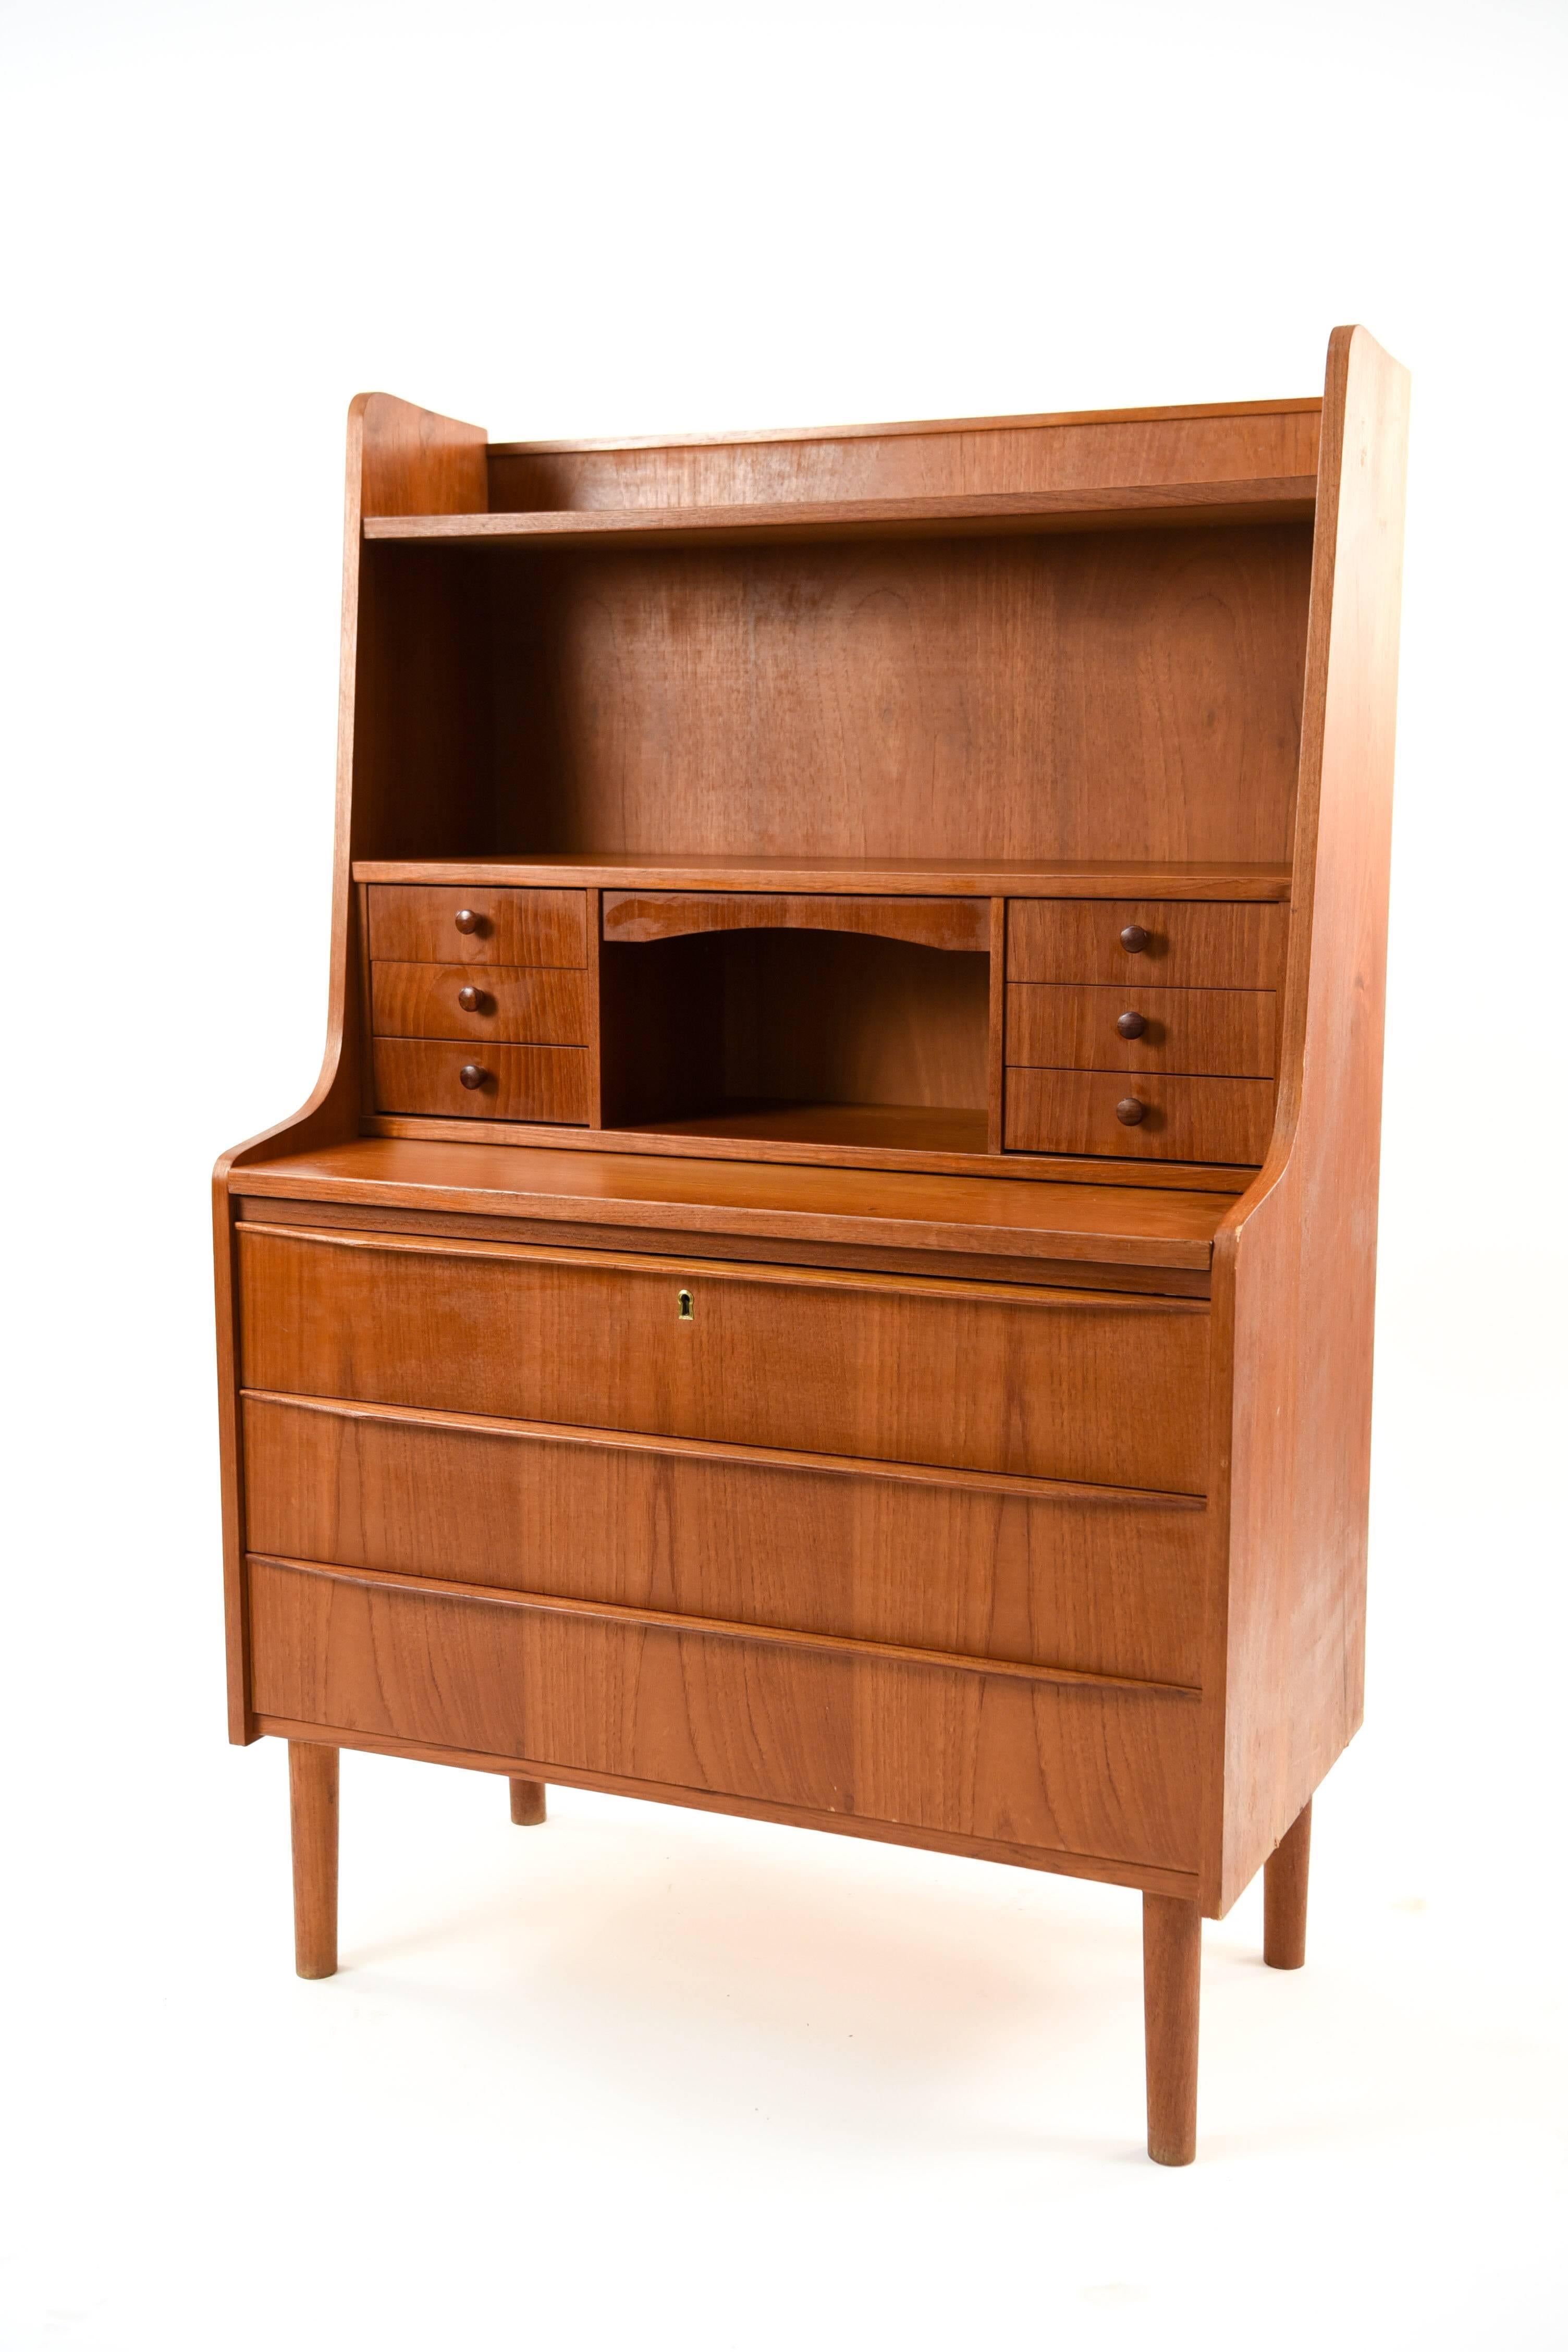 This Danish midcentury teak secretaire/secretary desk provides a great amount of storage in the larger drawers below and the smaller drawers above next to the writing surface.